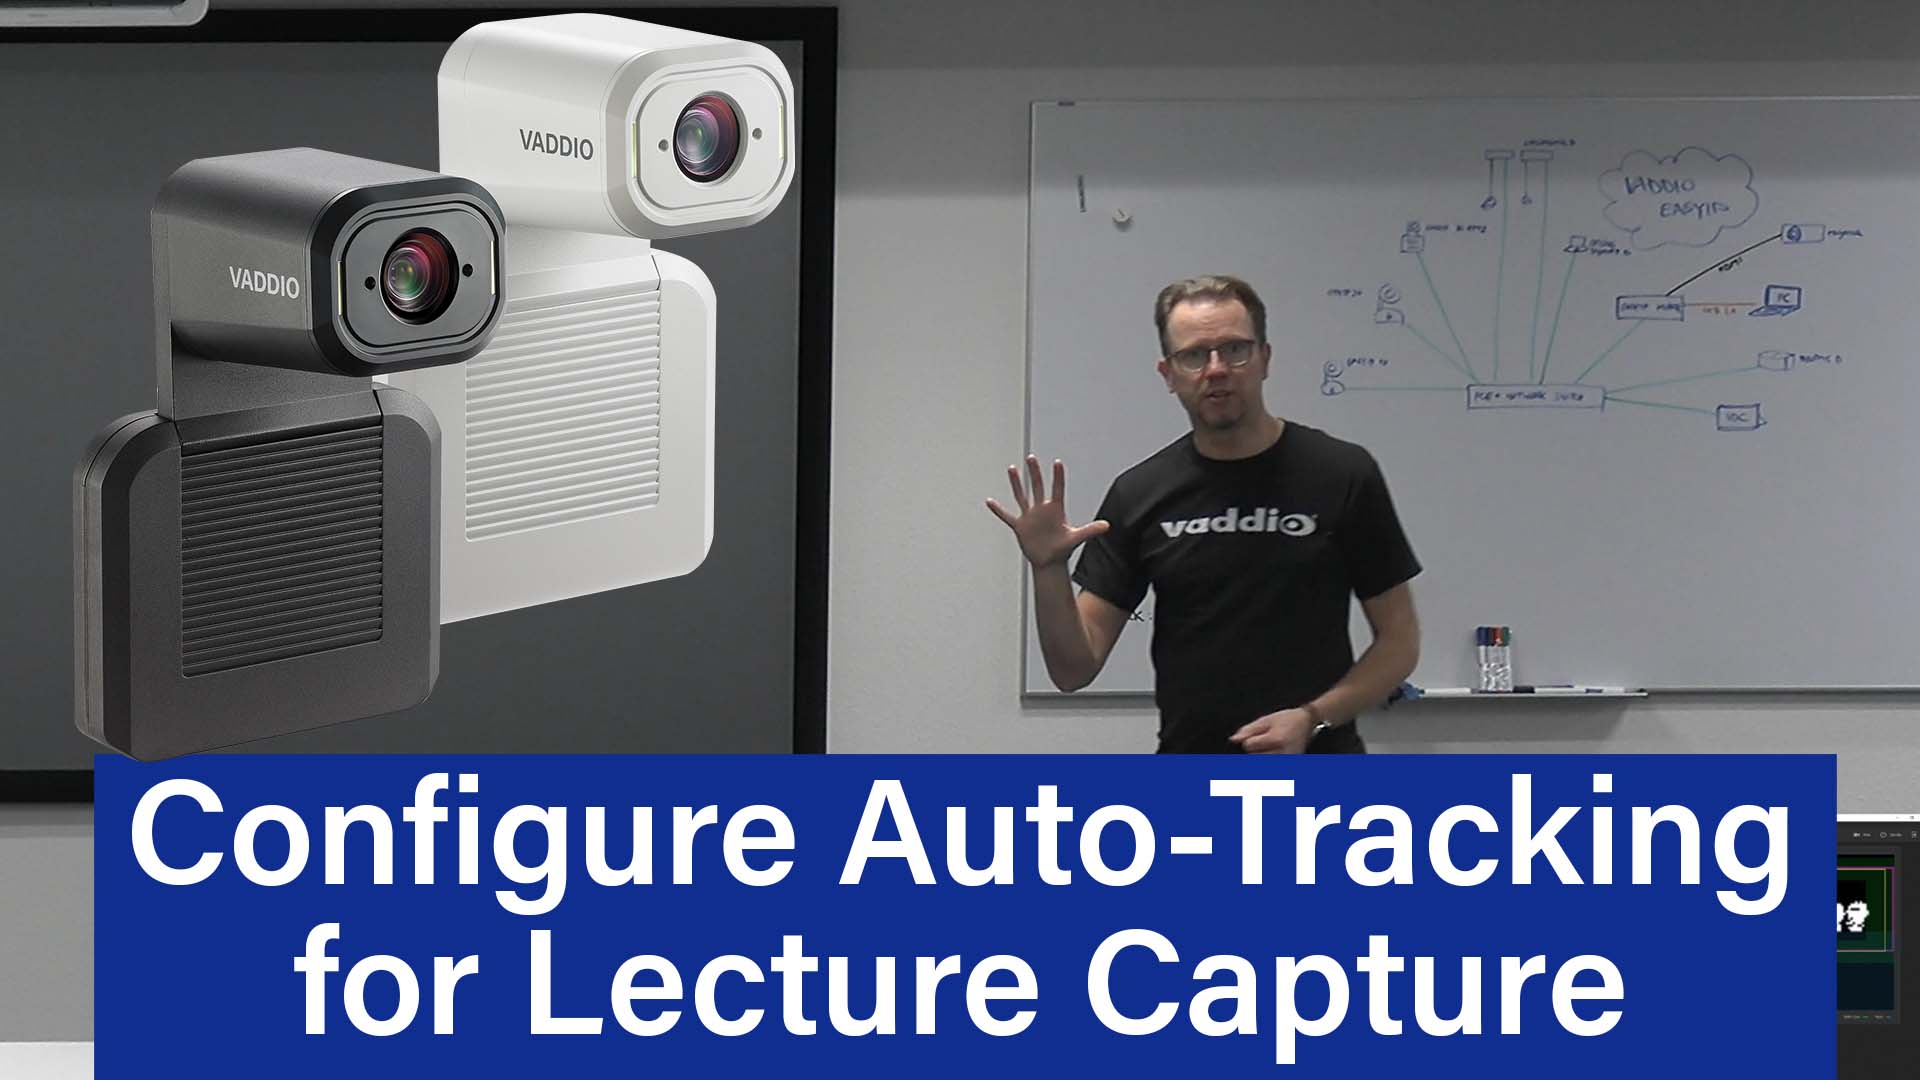 Vaddio-Auto-Tracking-for-Lecture-Capture-thumb